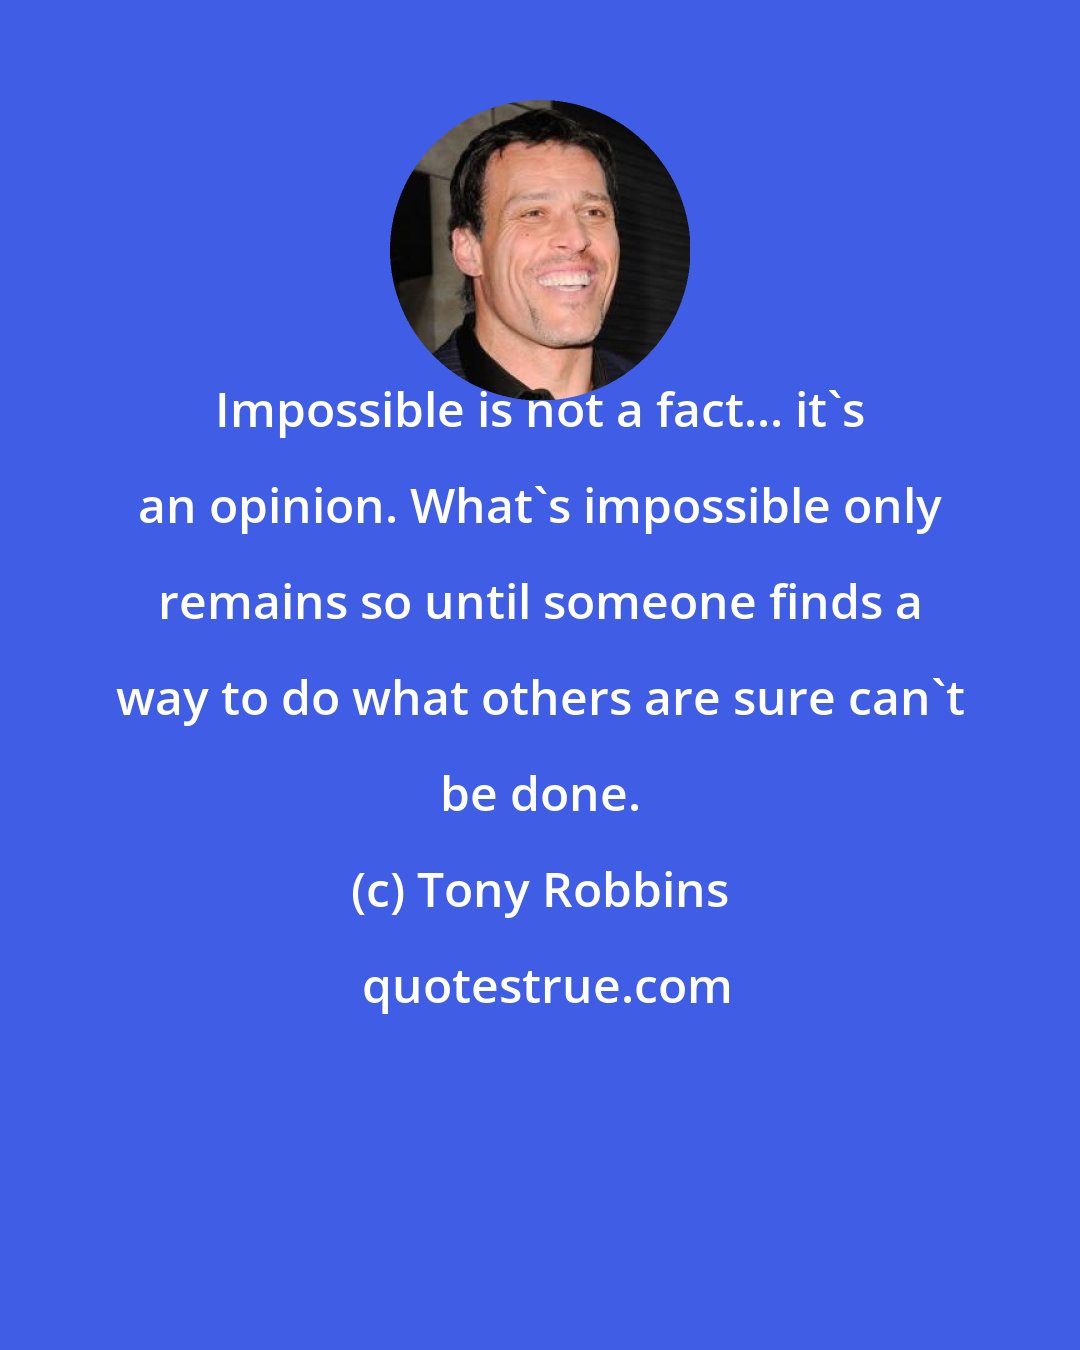 Tony Robbins: Impossible is not a fact... it's an opinion. What's impossible only remains so until someone finds a way to do what others are sure can't be done.